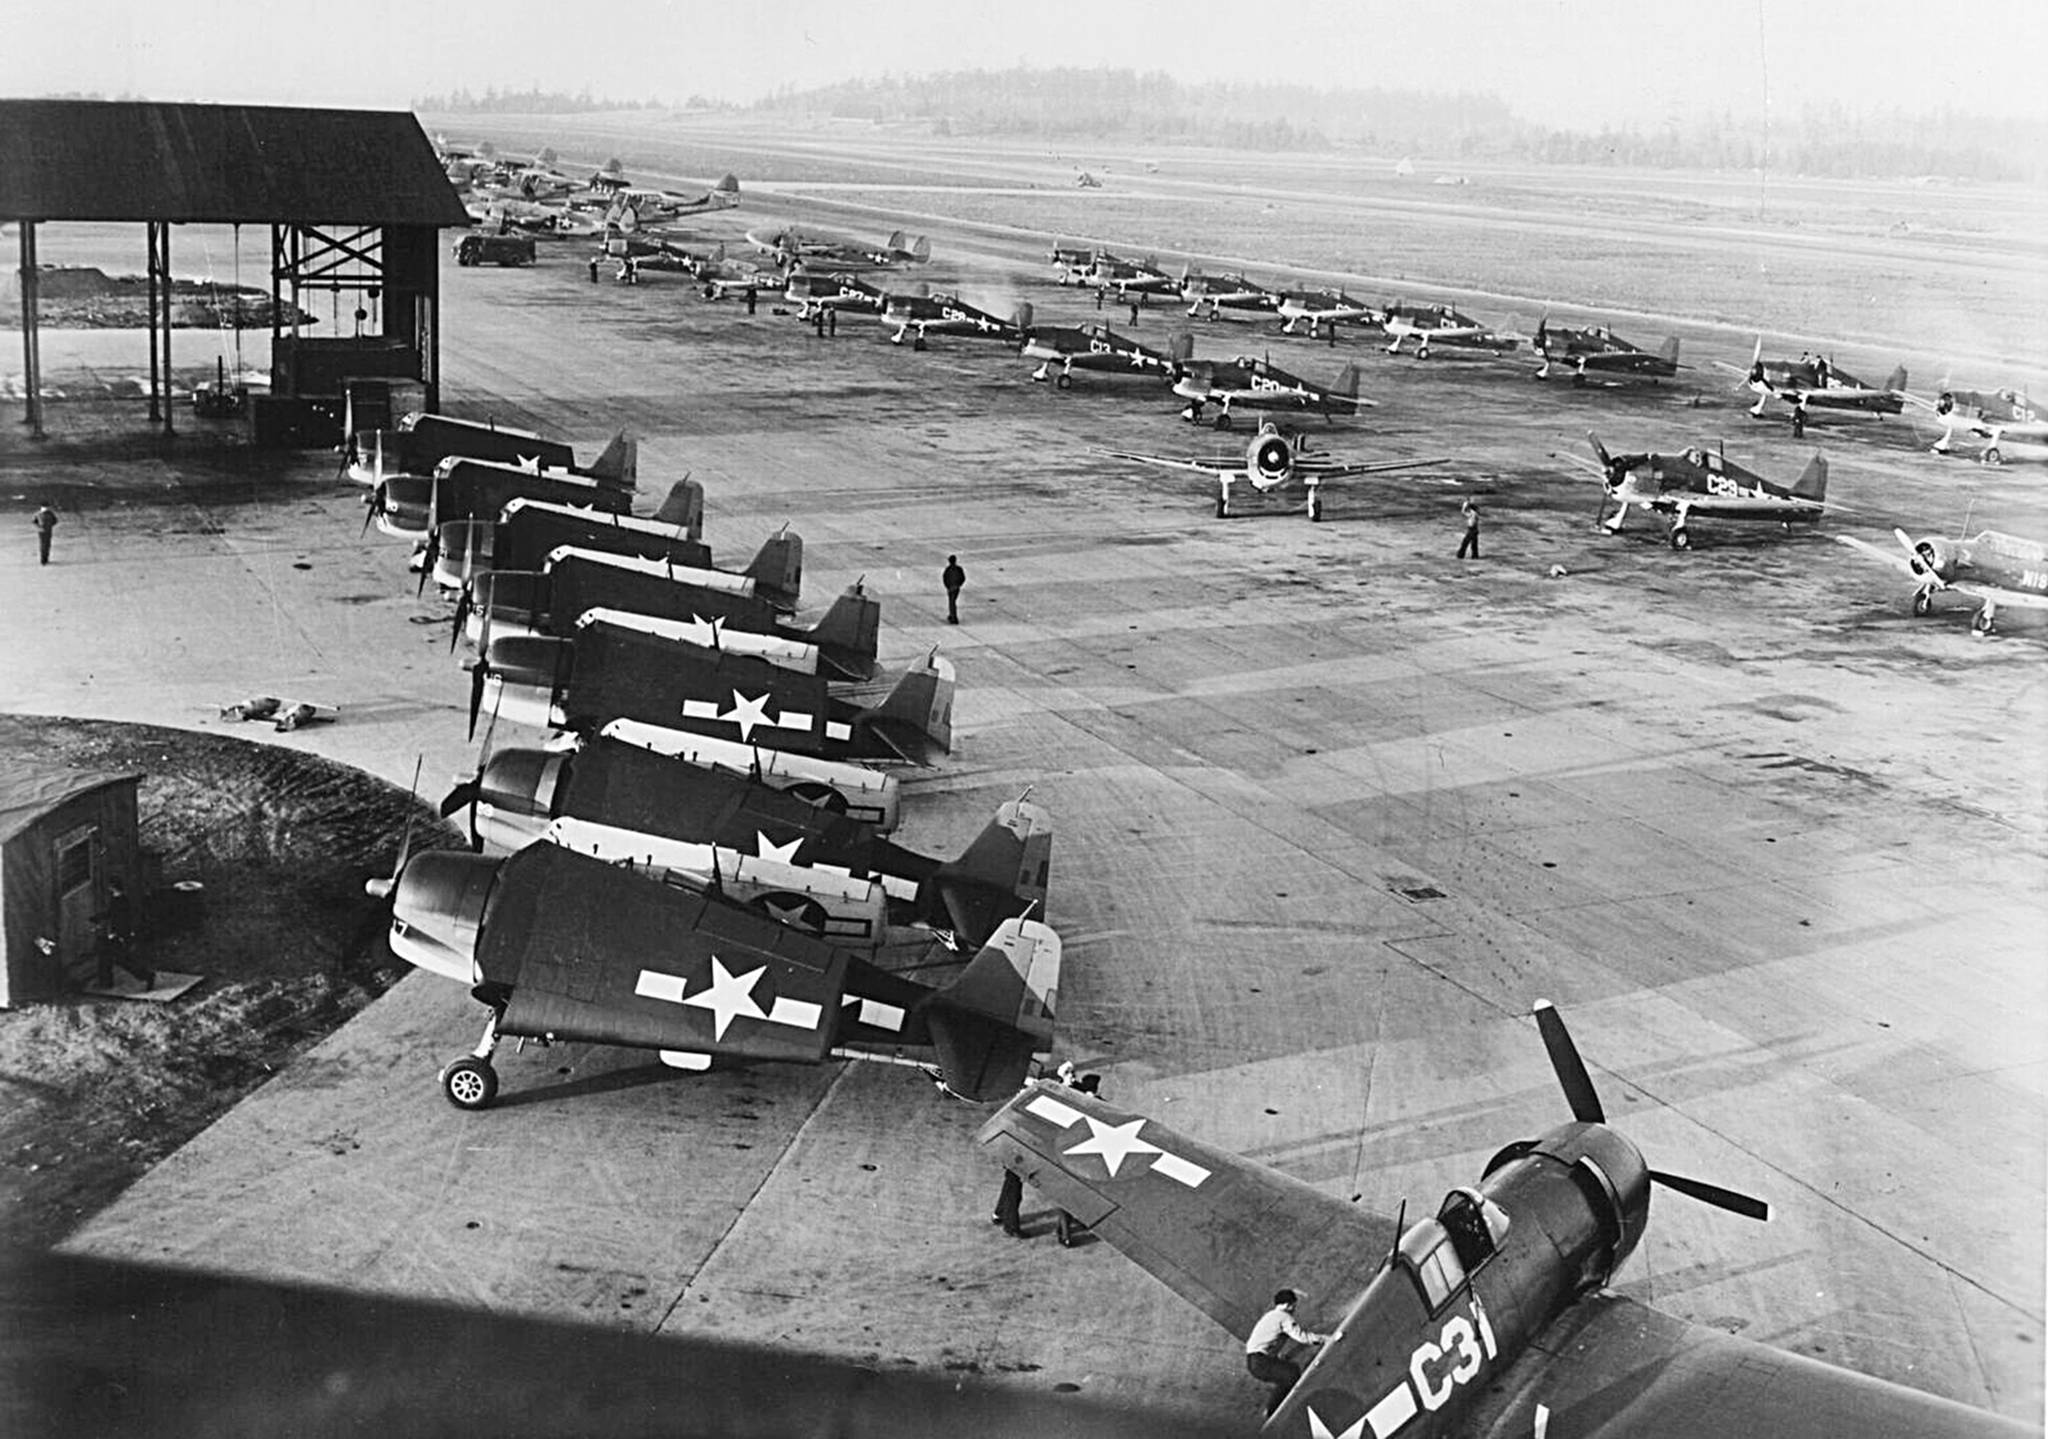 NAS Whidbey turns 75